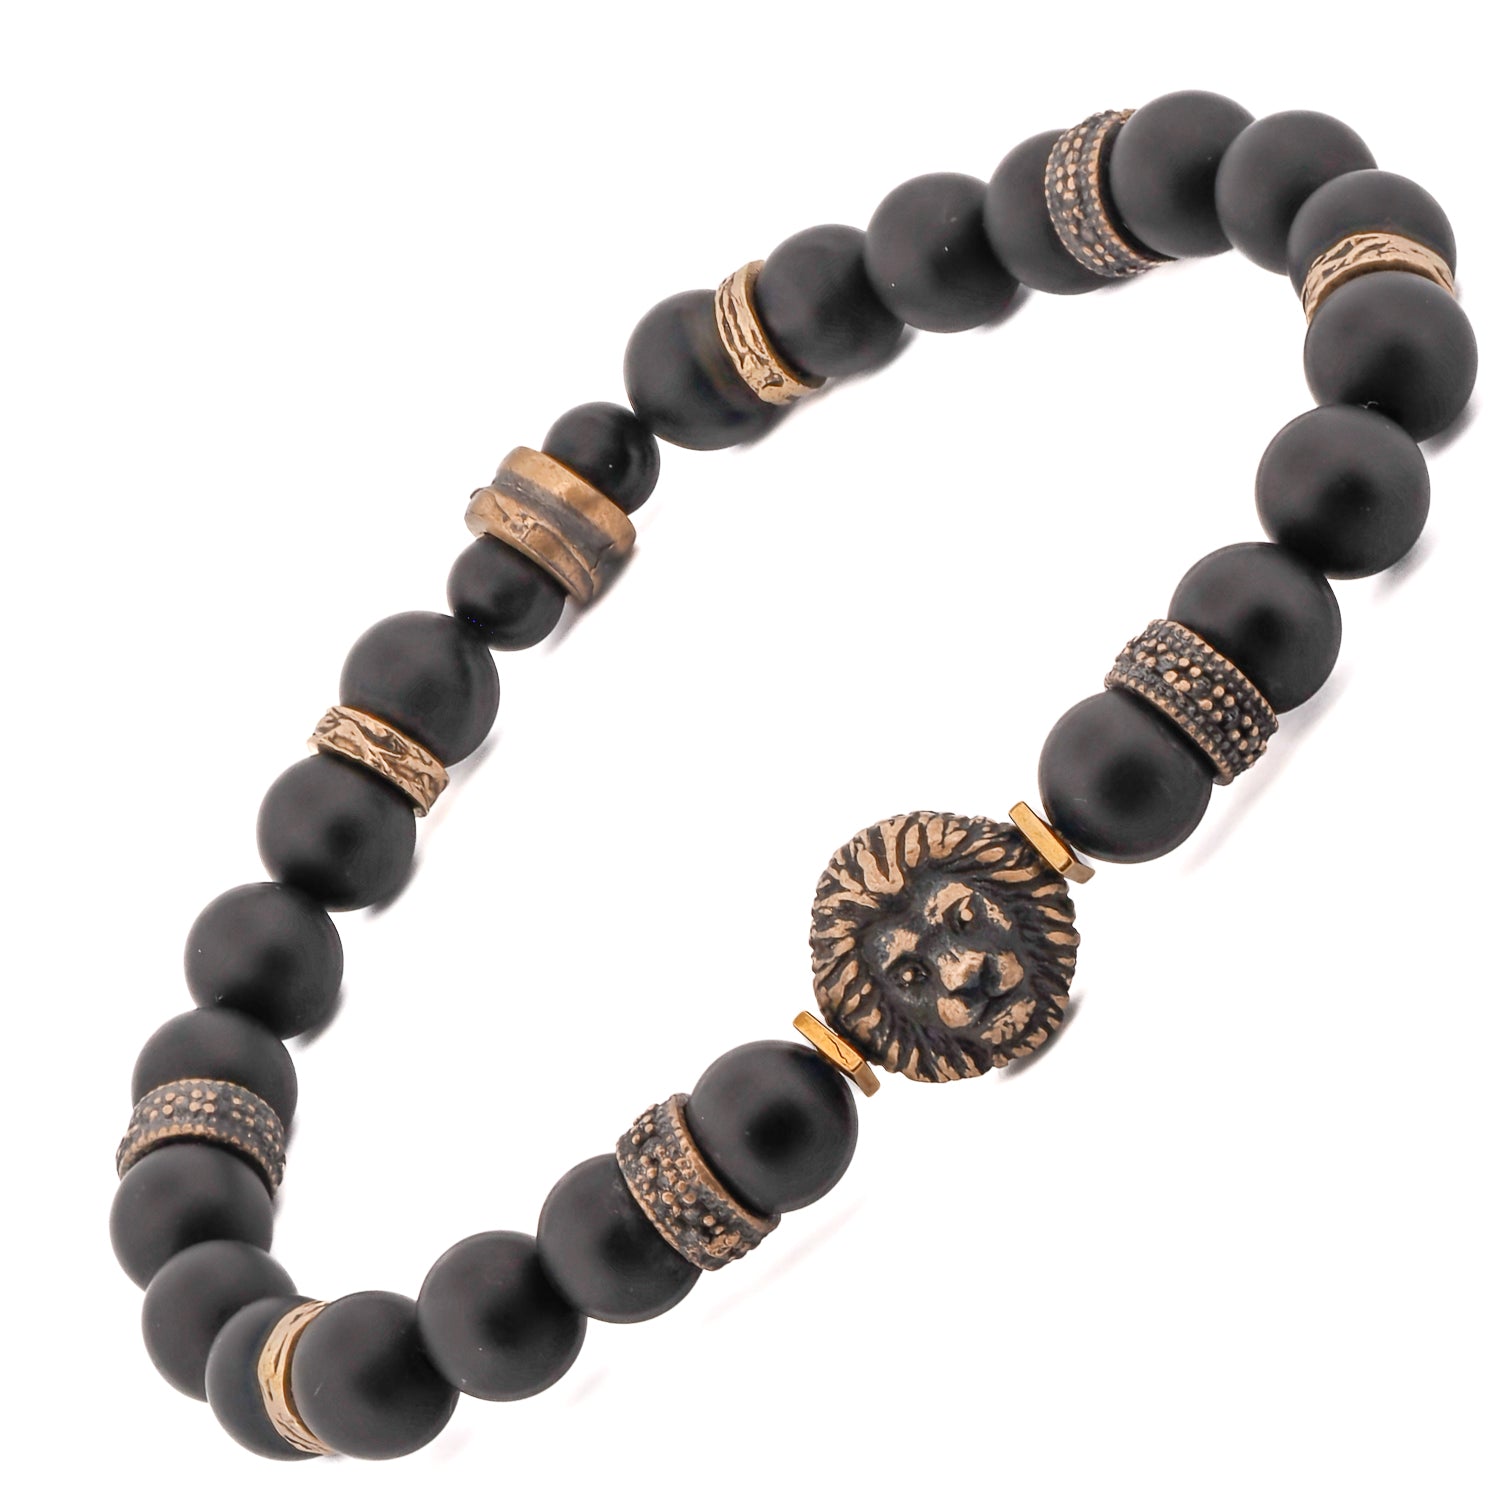 Unique Black Onyx and Bronze Lion Bracelet, handcrafted with 8mm matte black onyx beads and bronze spacers